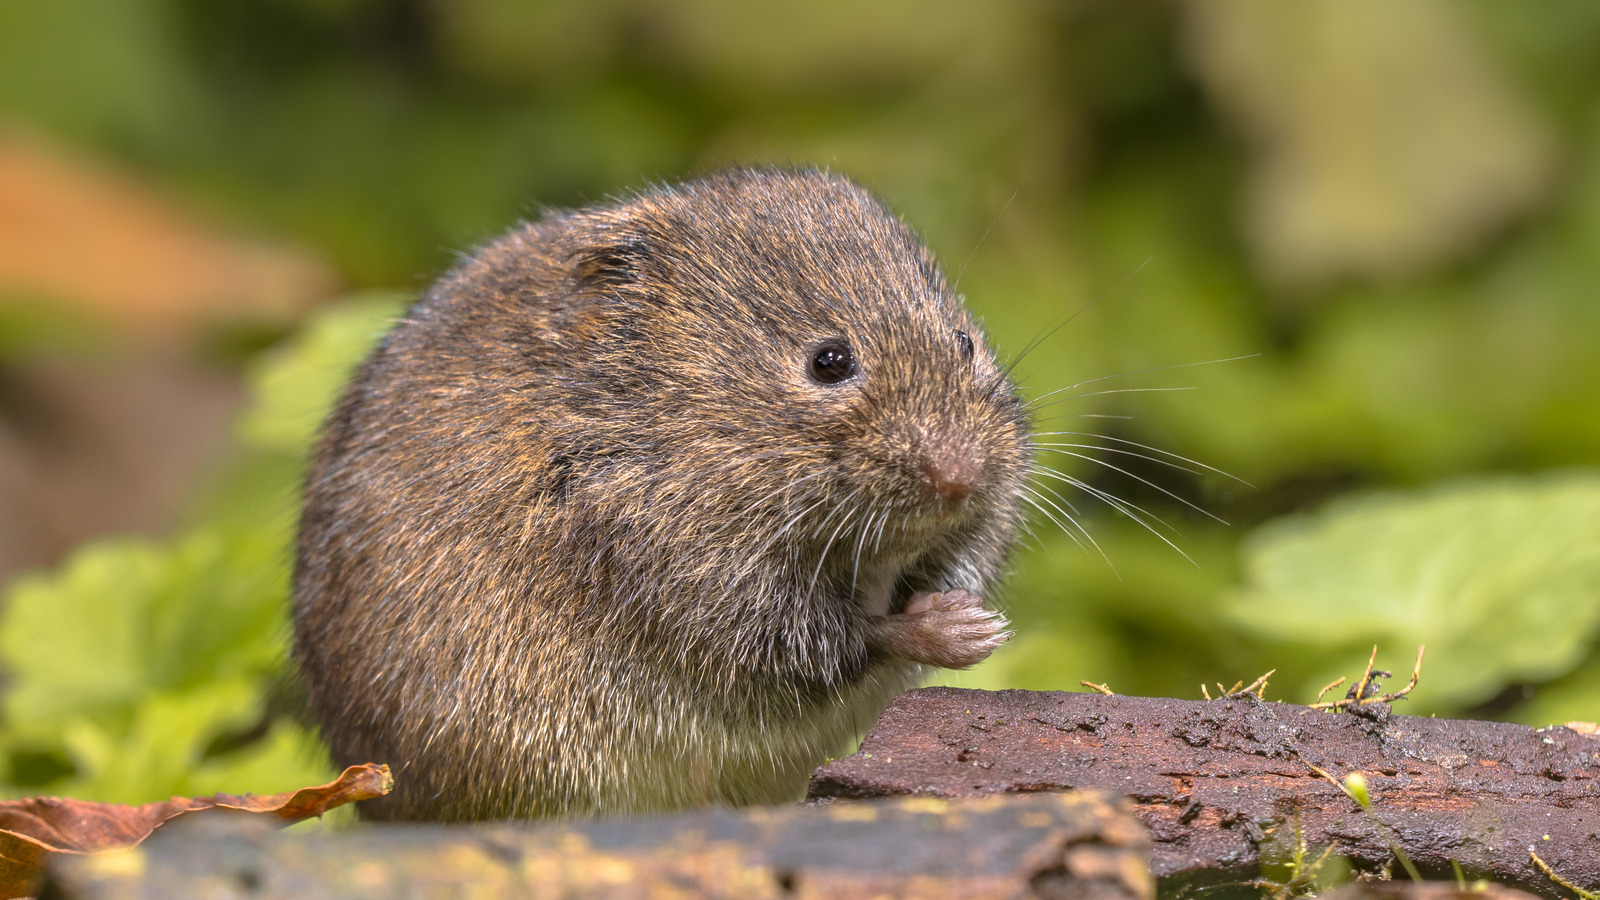 https://www.housedigest.com/img/gallery/8-best-ways-to-get-rid-of-voles-from-your-yard/l-intro-1635182647.jpg